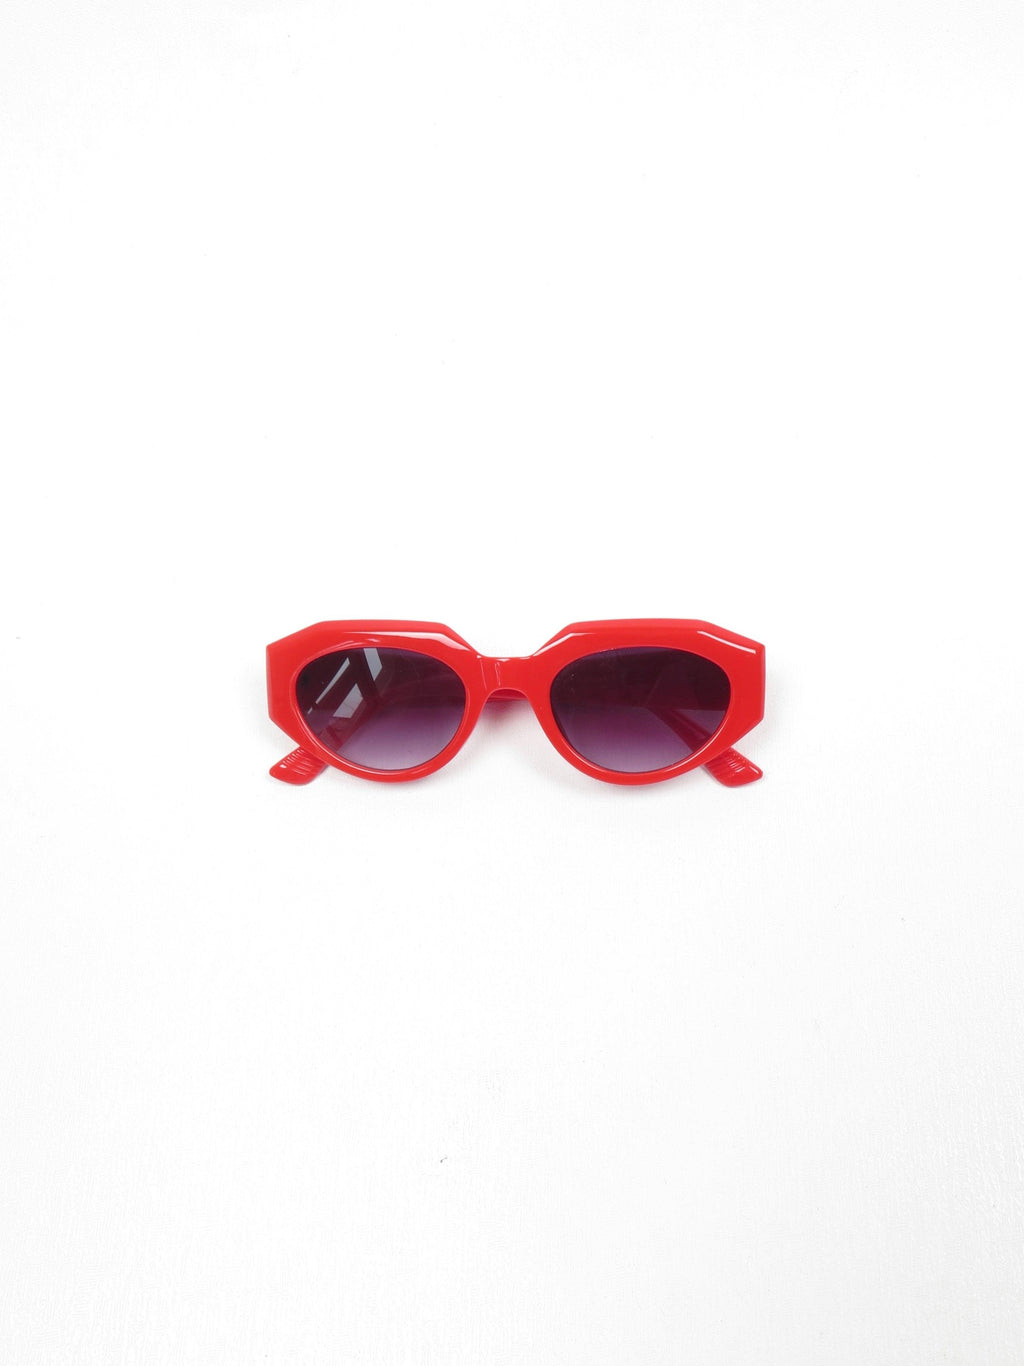 Edgy All Day Sunglasses - The Harlequin